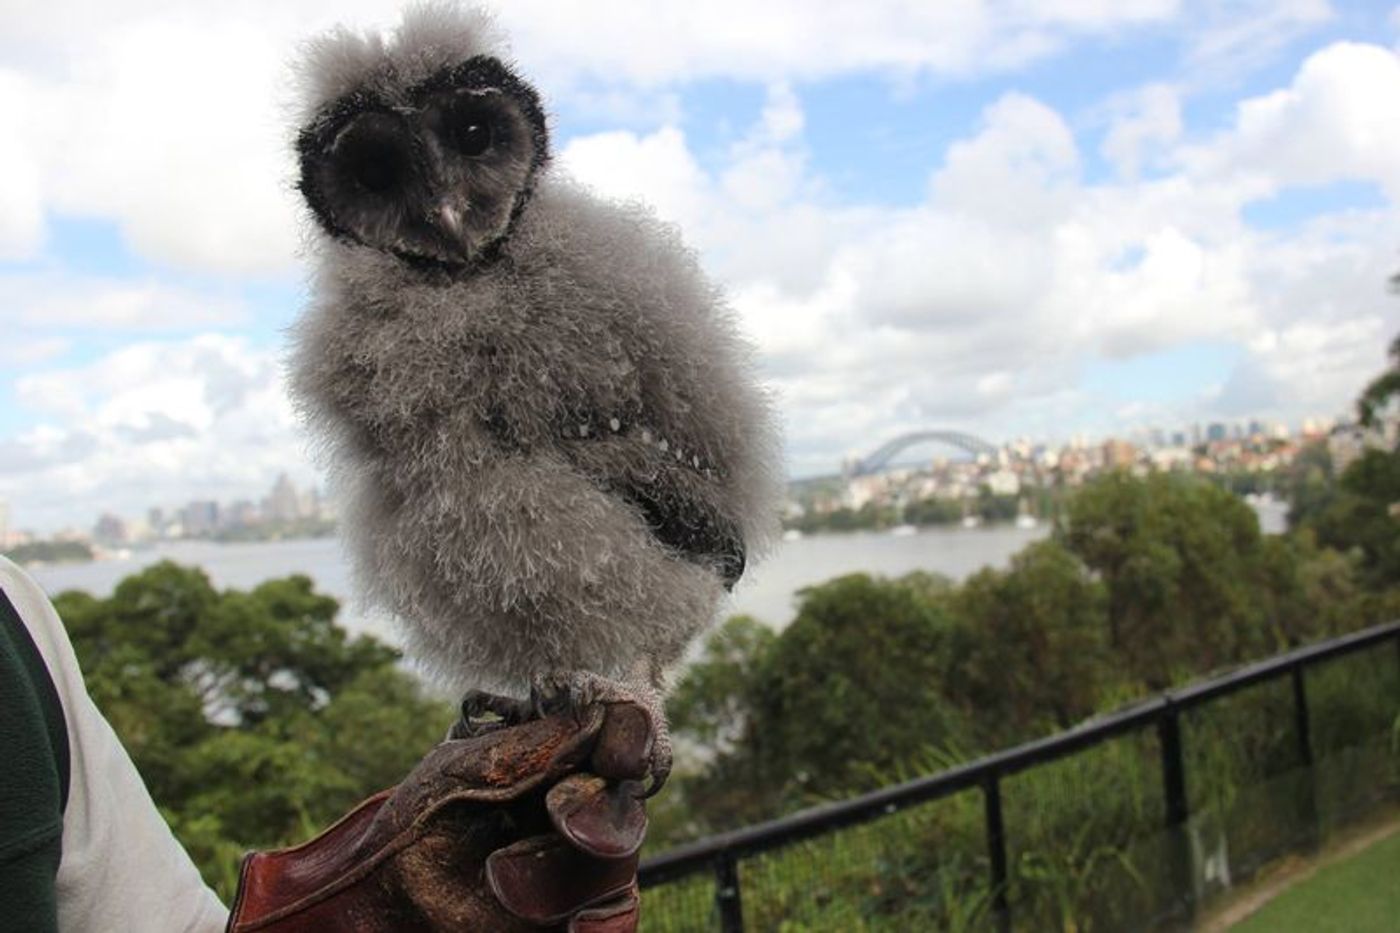 Griffin, a nine week old Sooty Owl chick arrived recently at the Taronga Zoo